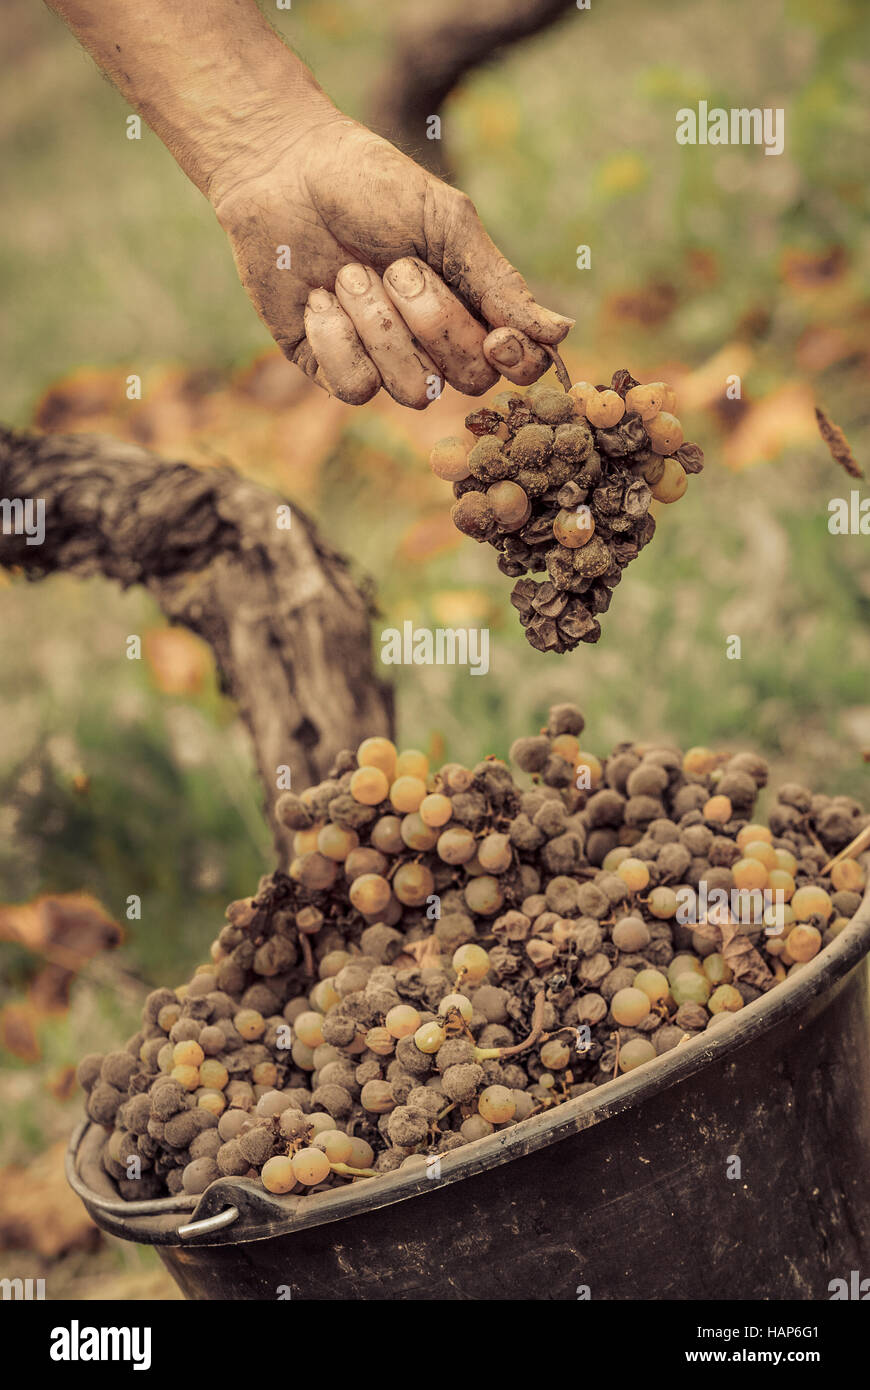 Noble rot of a wine grape, grapes with mold, Botrytis, Sauternes, France Stock Photo